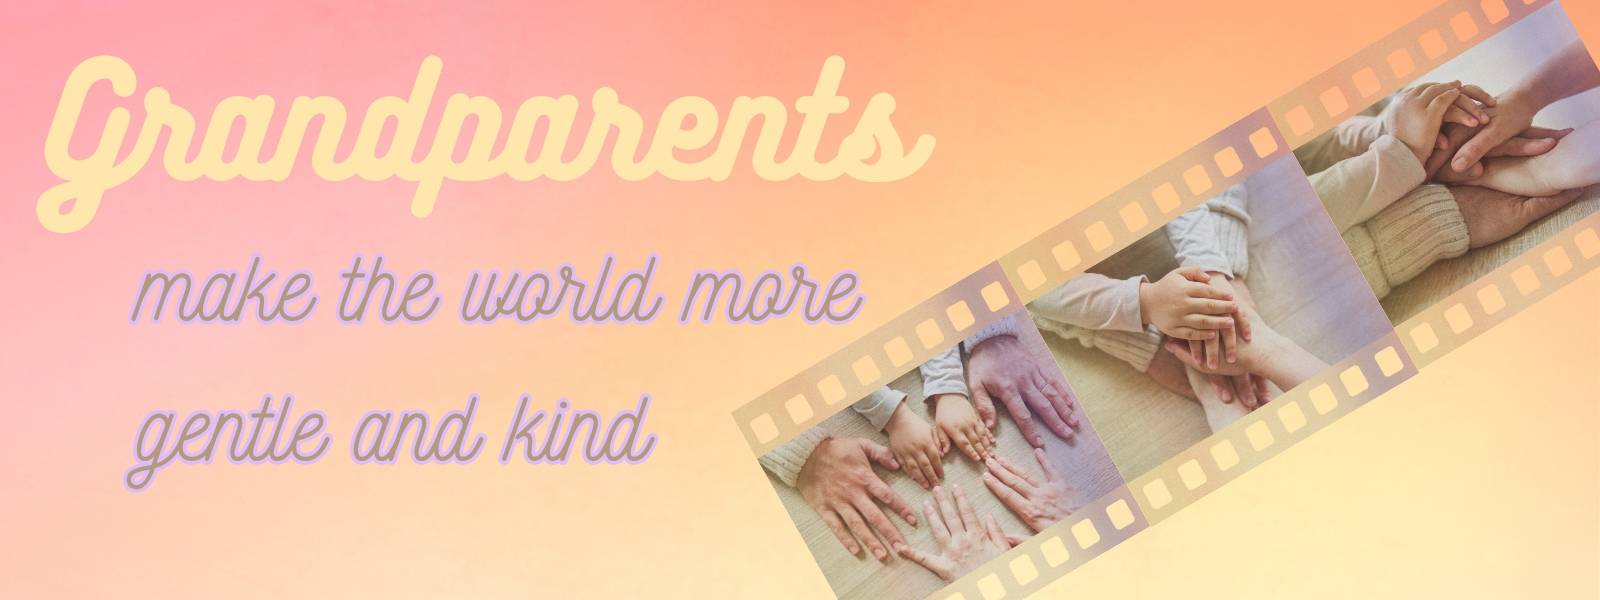 Grandparents make the world more gentle and kind